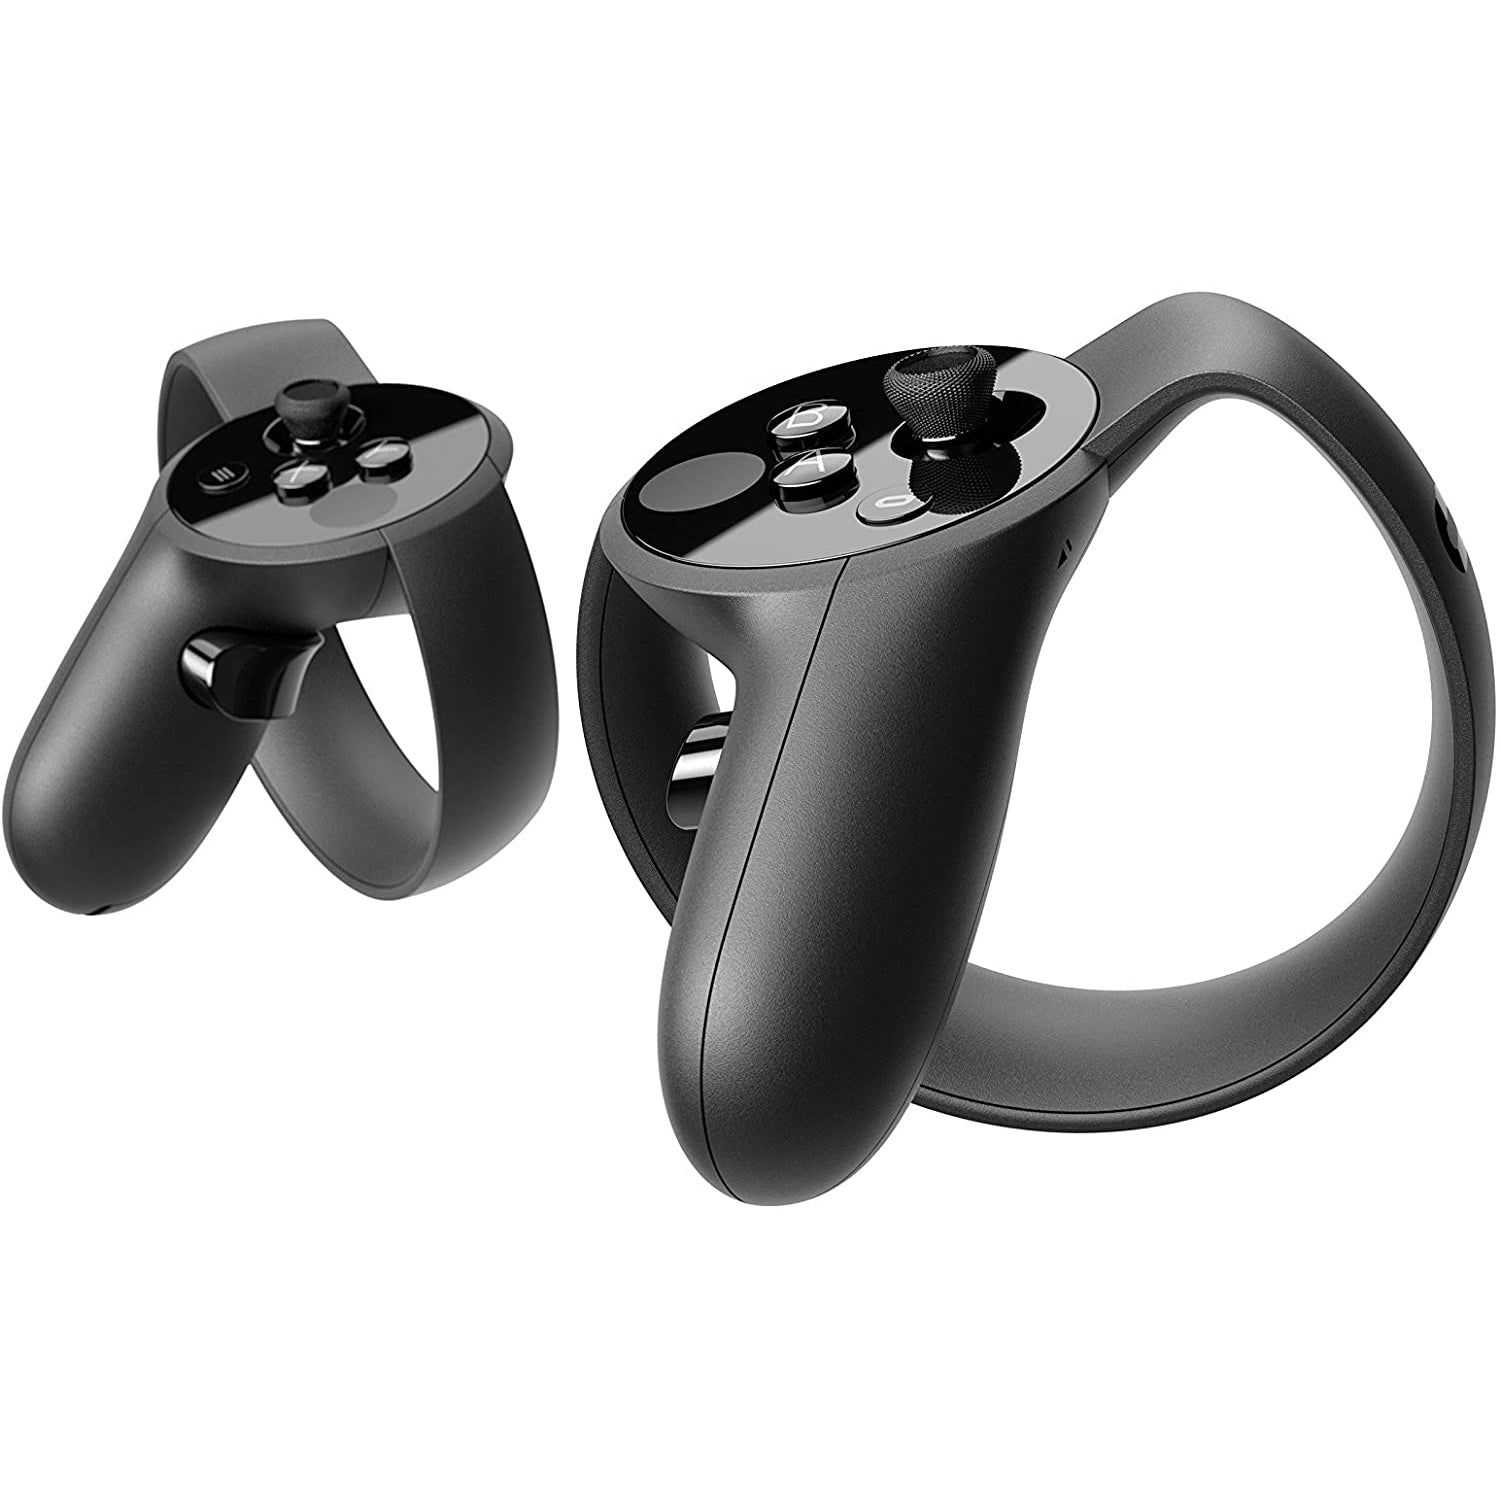 Oculus Rift Touch Controllers - Black